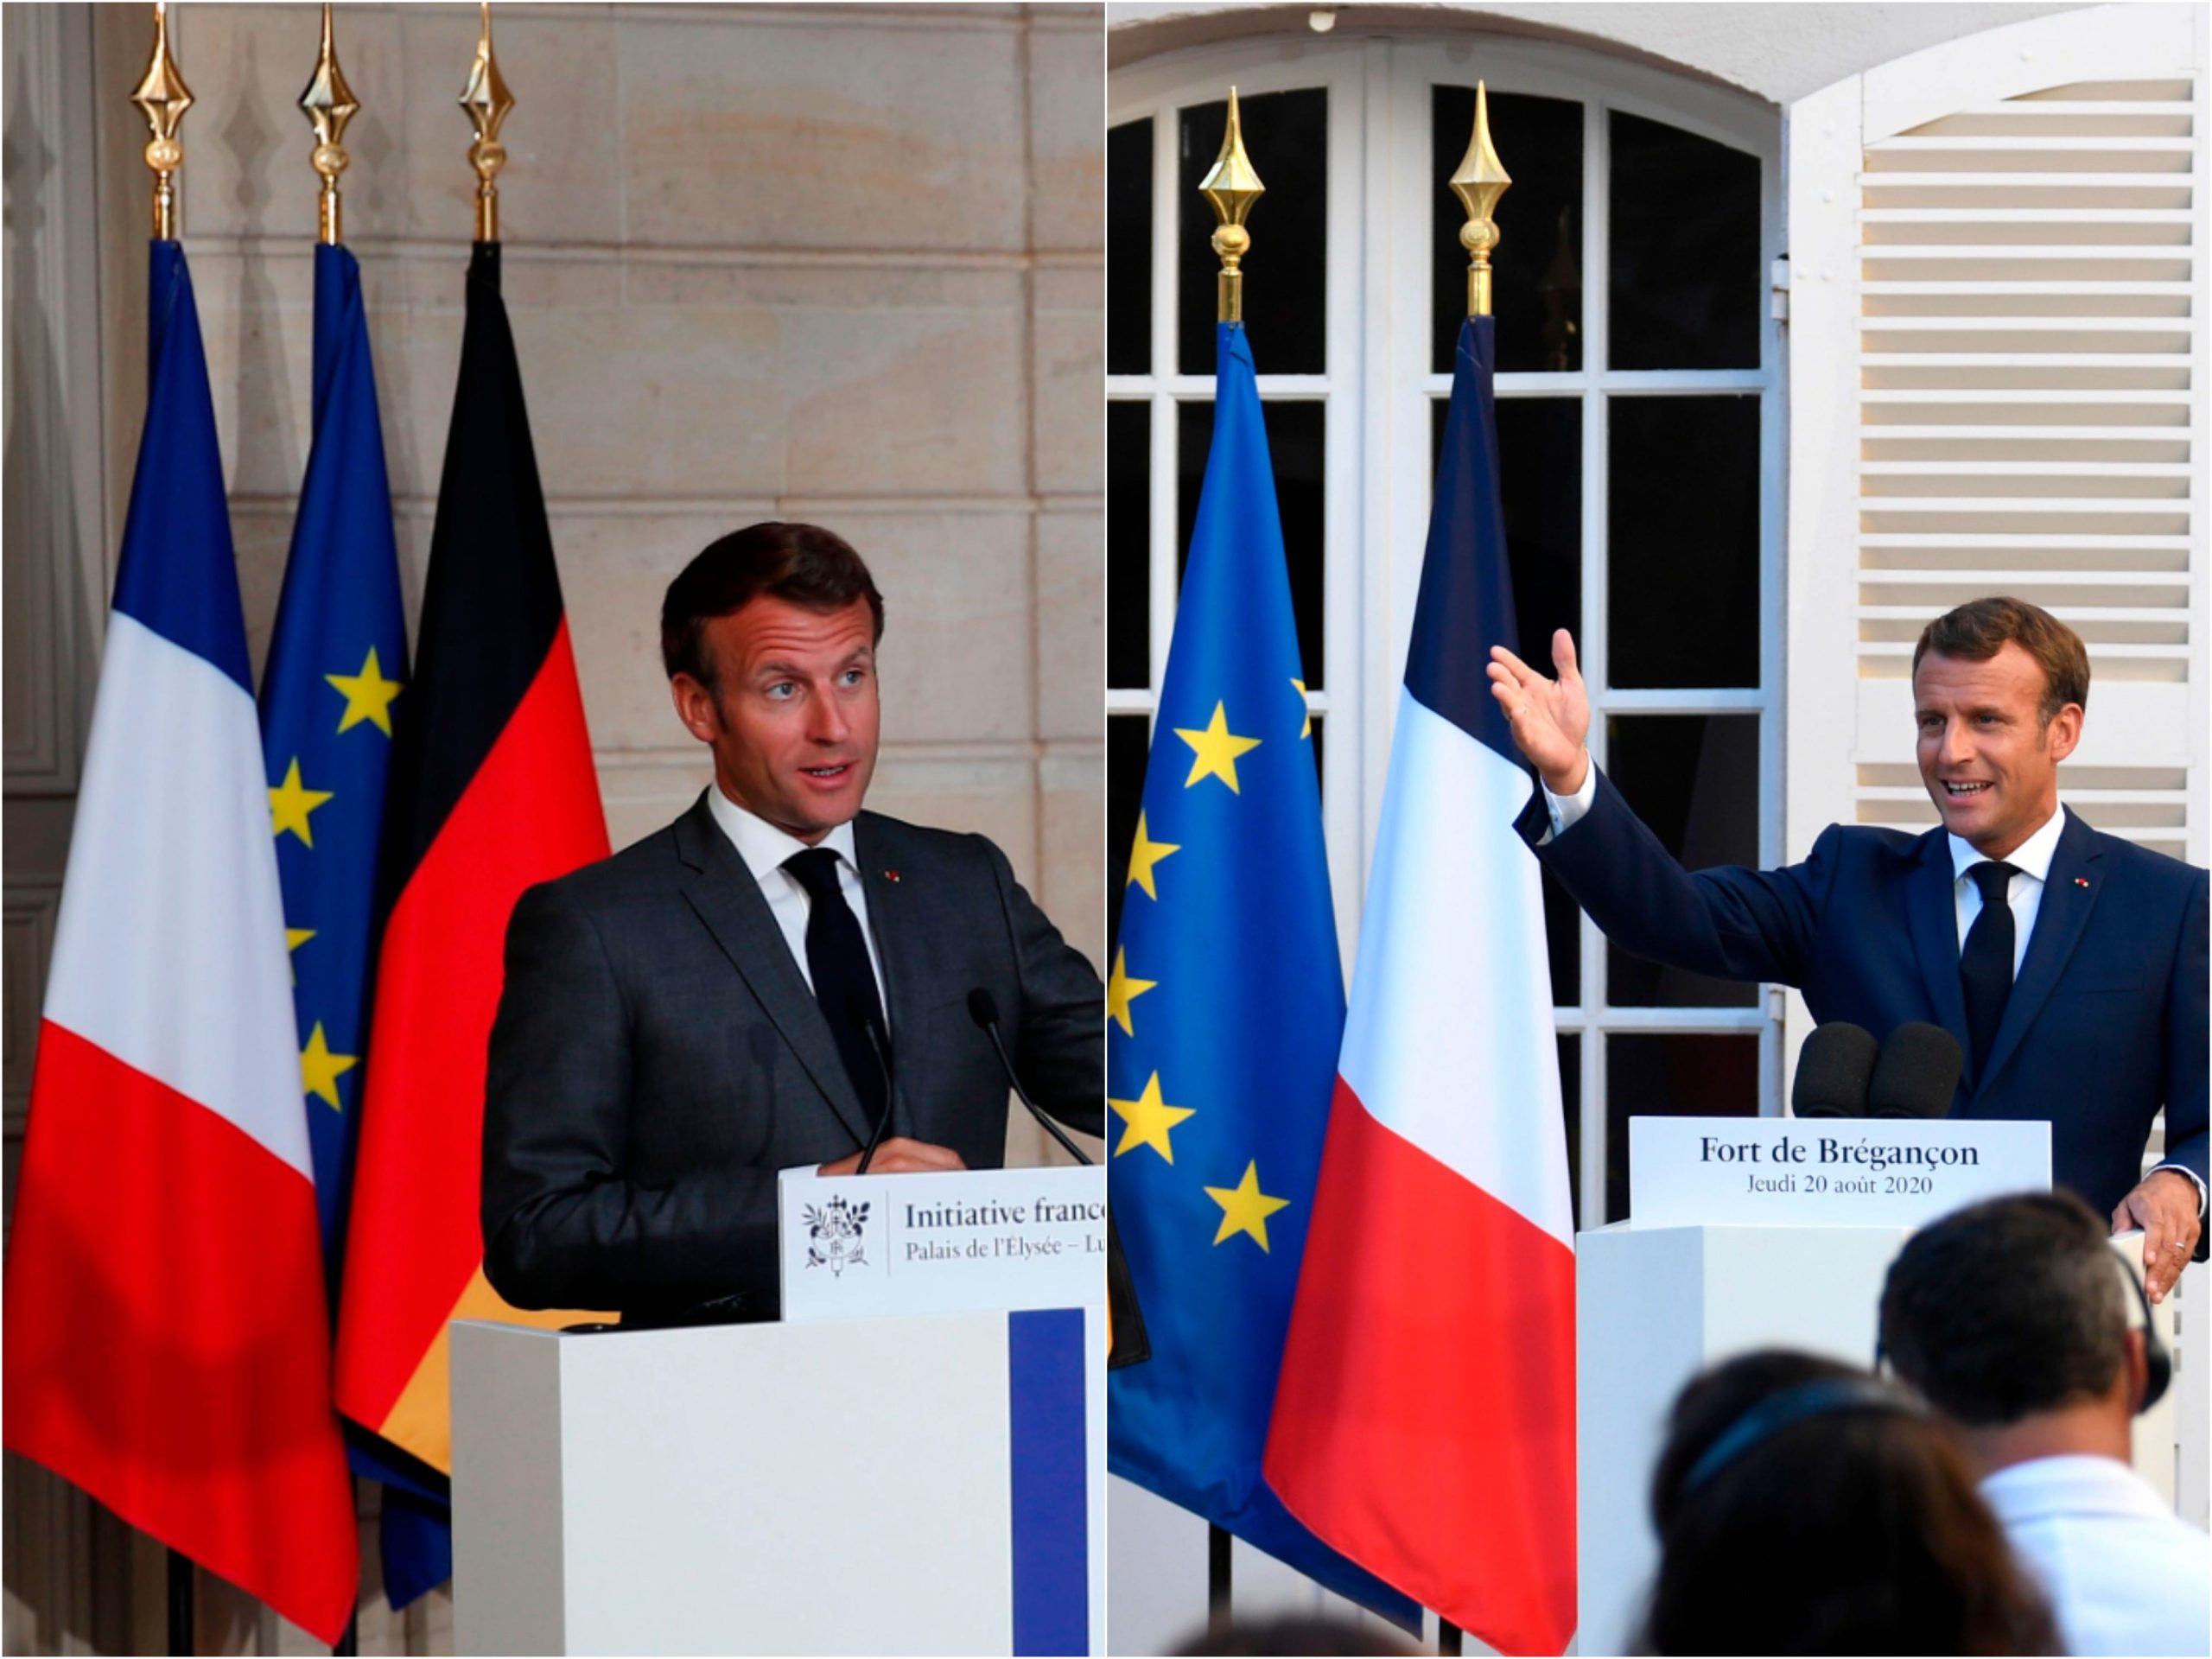 French President Emmanuel Macron in front of the French and European Union flags in May 2020 (left) and August 2020 (right).